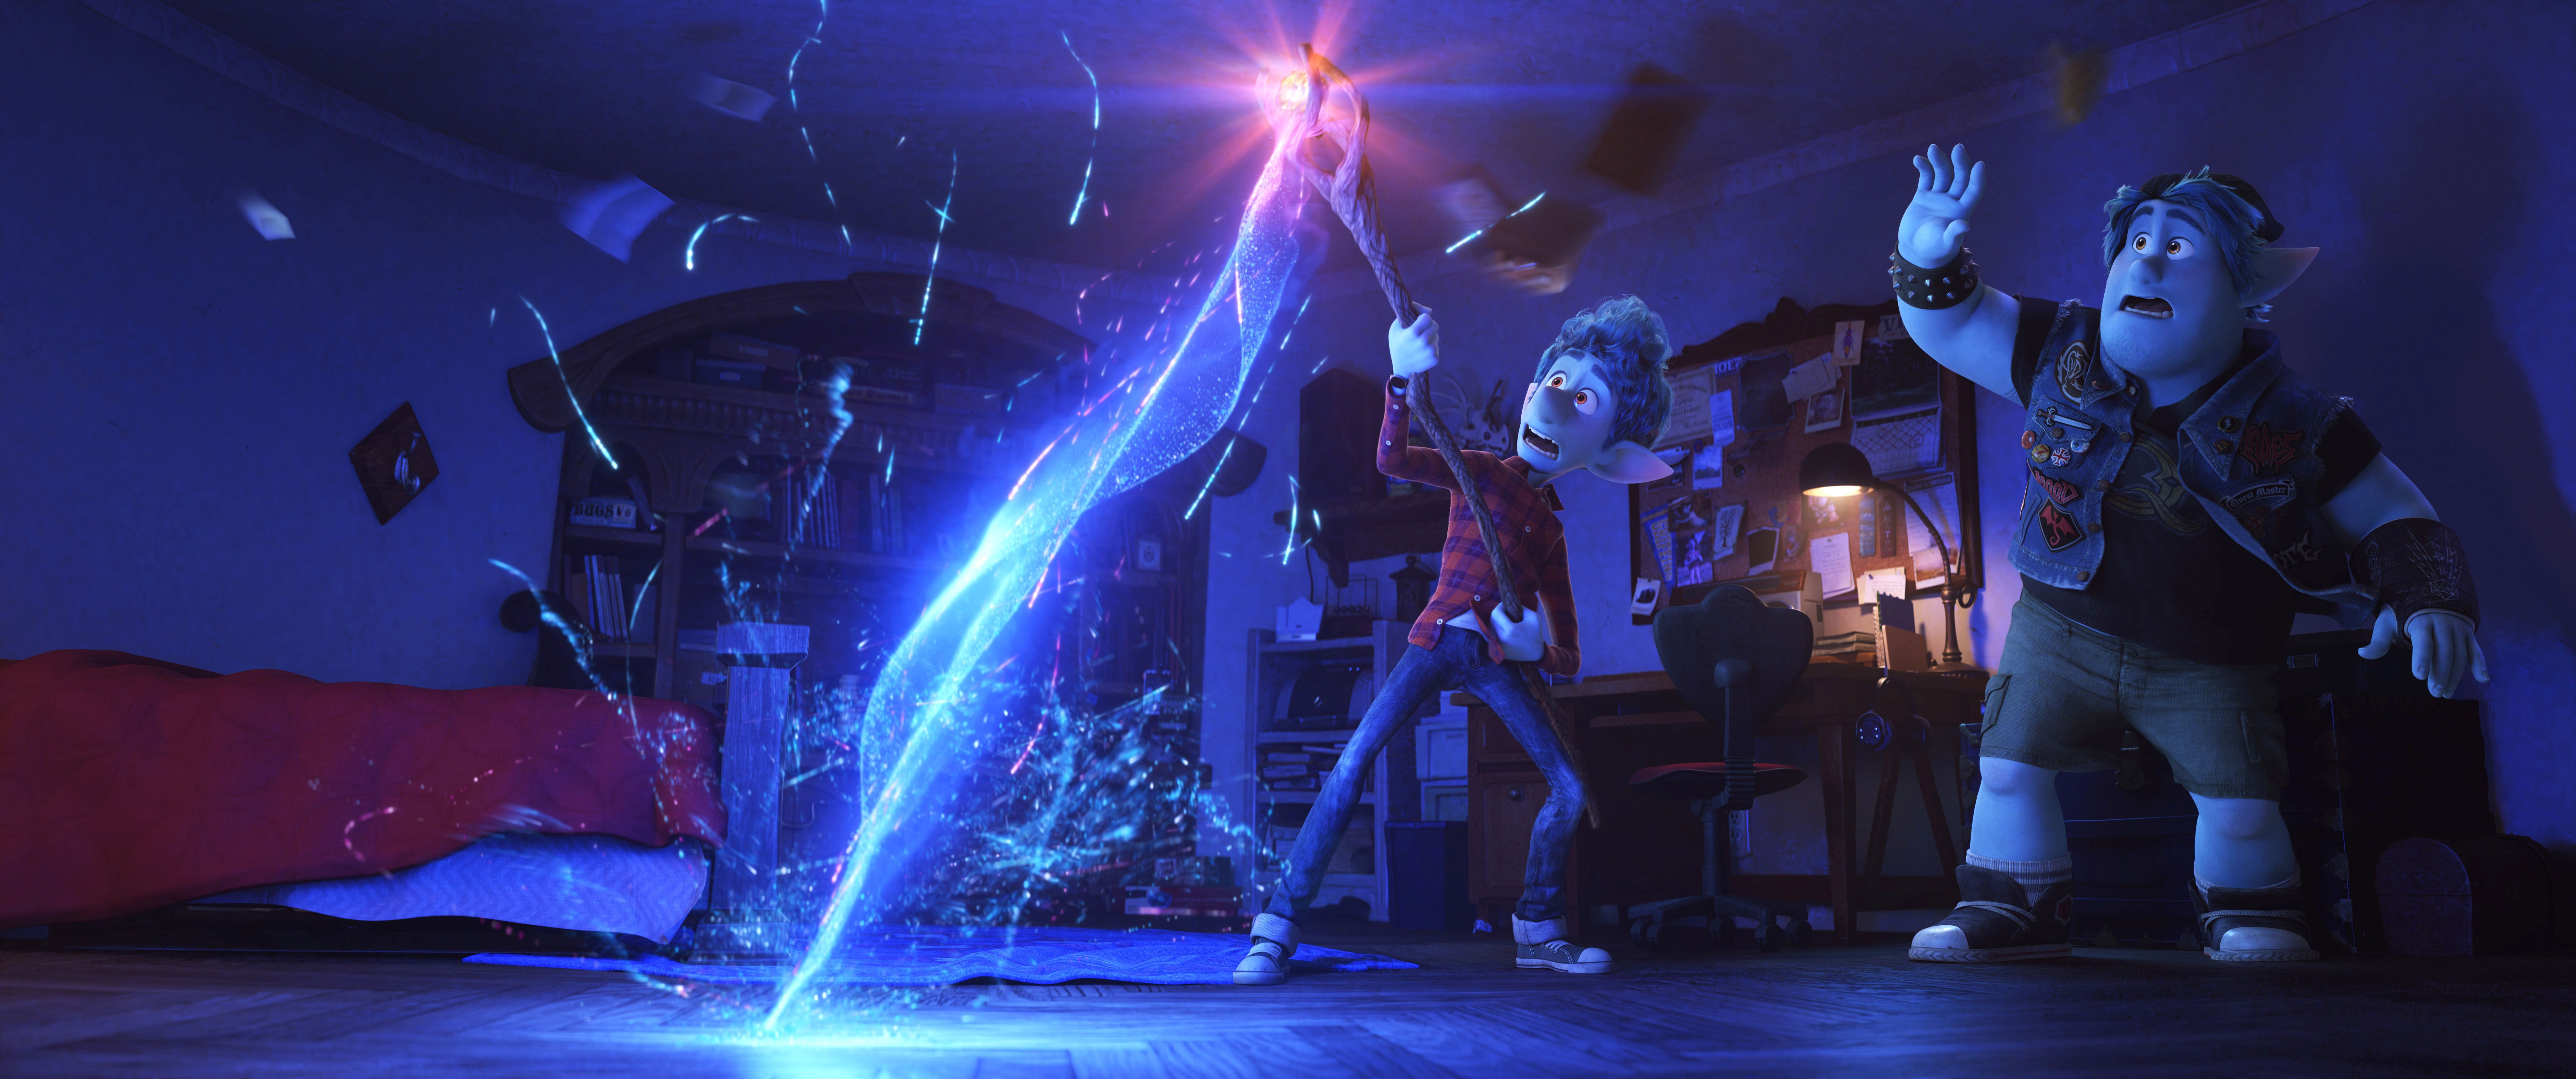 In Pixar’s Onward, Ian Lightfoot (voiced by Tom Holland) receives a wizard’s staff on his 16th birthday from his late father and a spell that hints it will bring him back for just one day. Directed by Dan Scanlon, with Chris Pratt and Julia Louis-Dreyfus co-starring. Image: Pixar